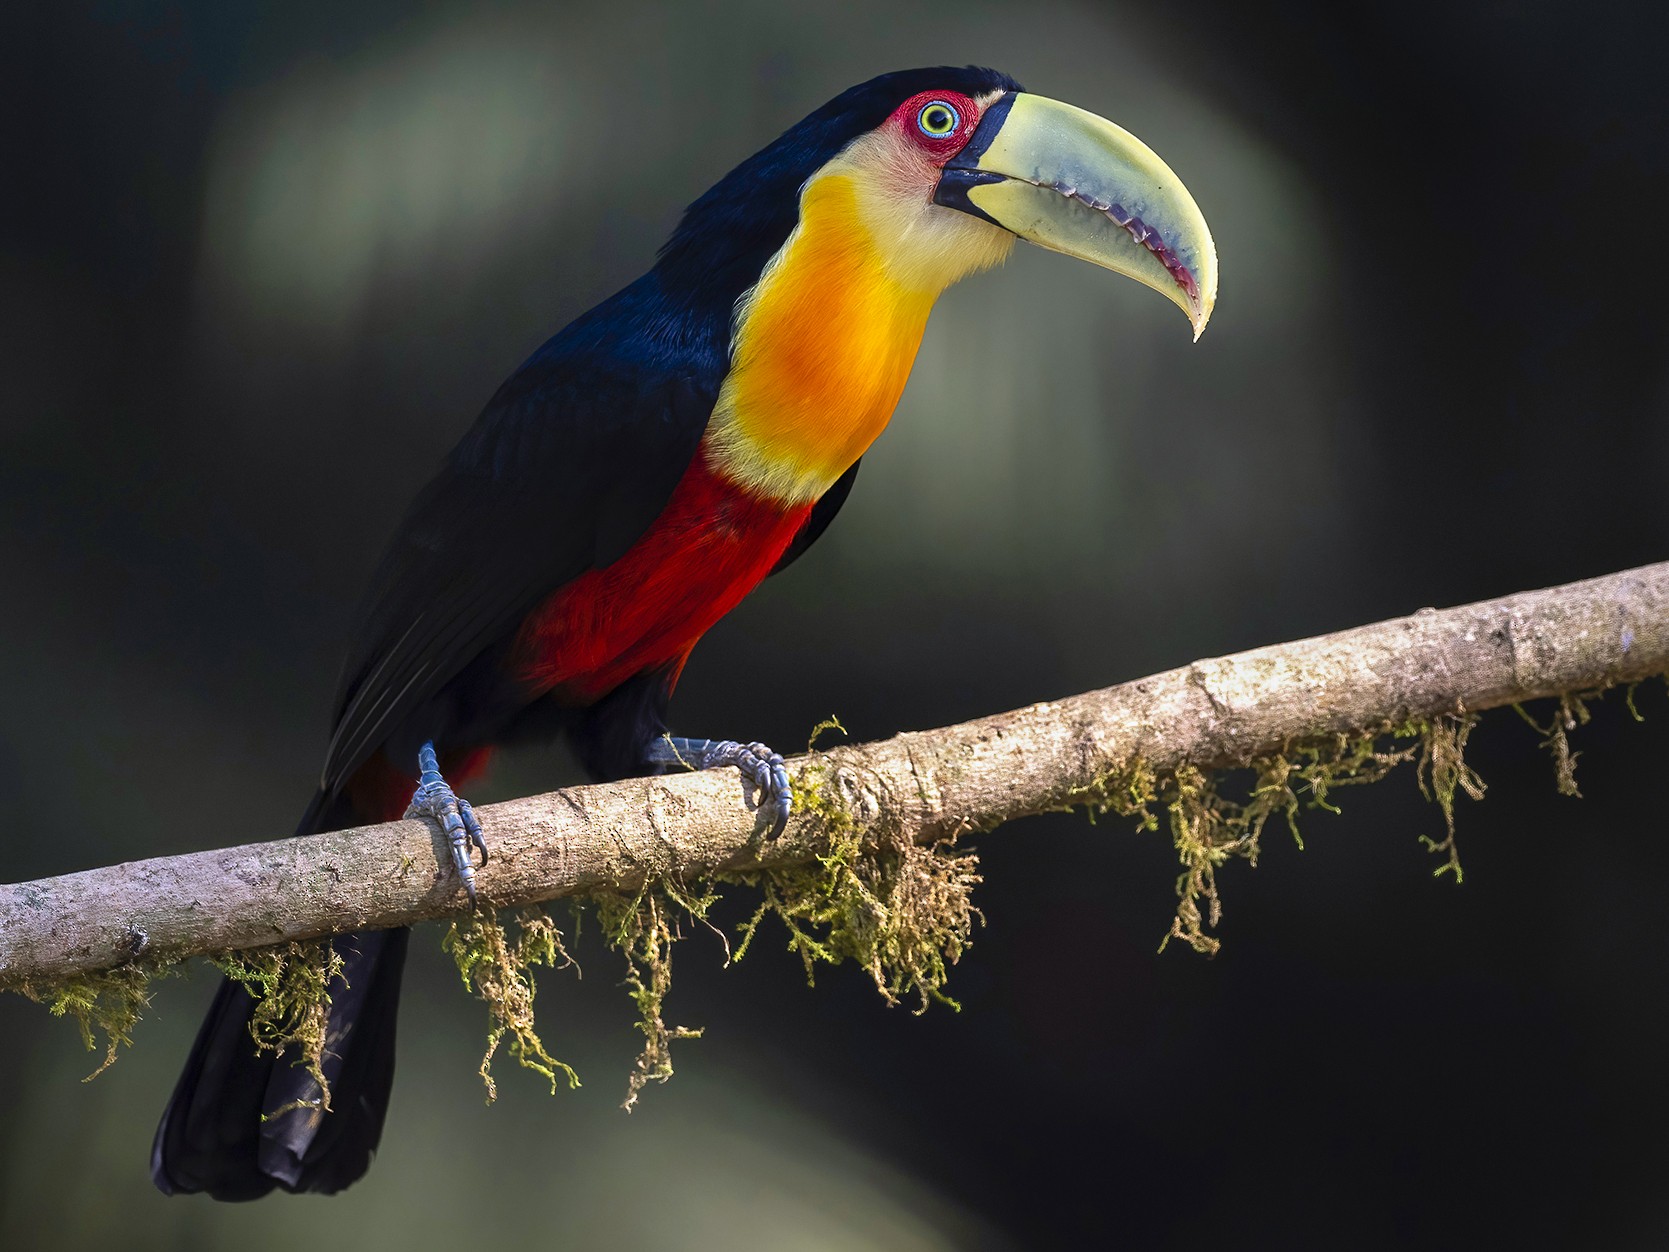 Red-breasted Toucan - Andres Vasquez Noboa